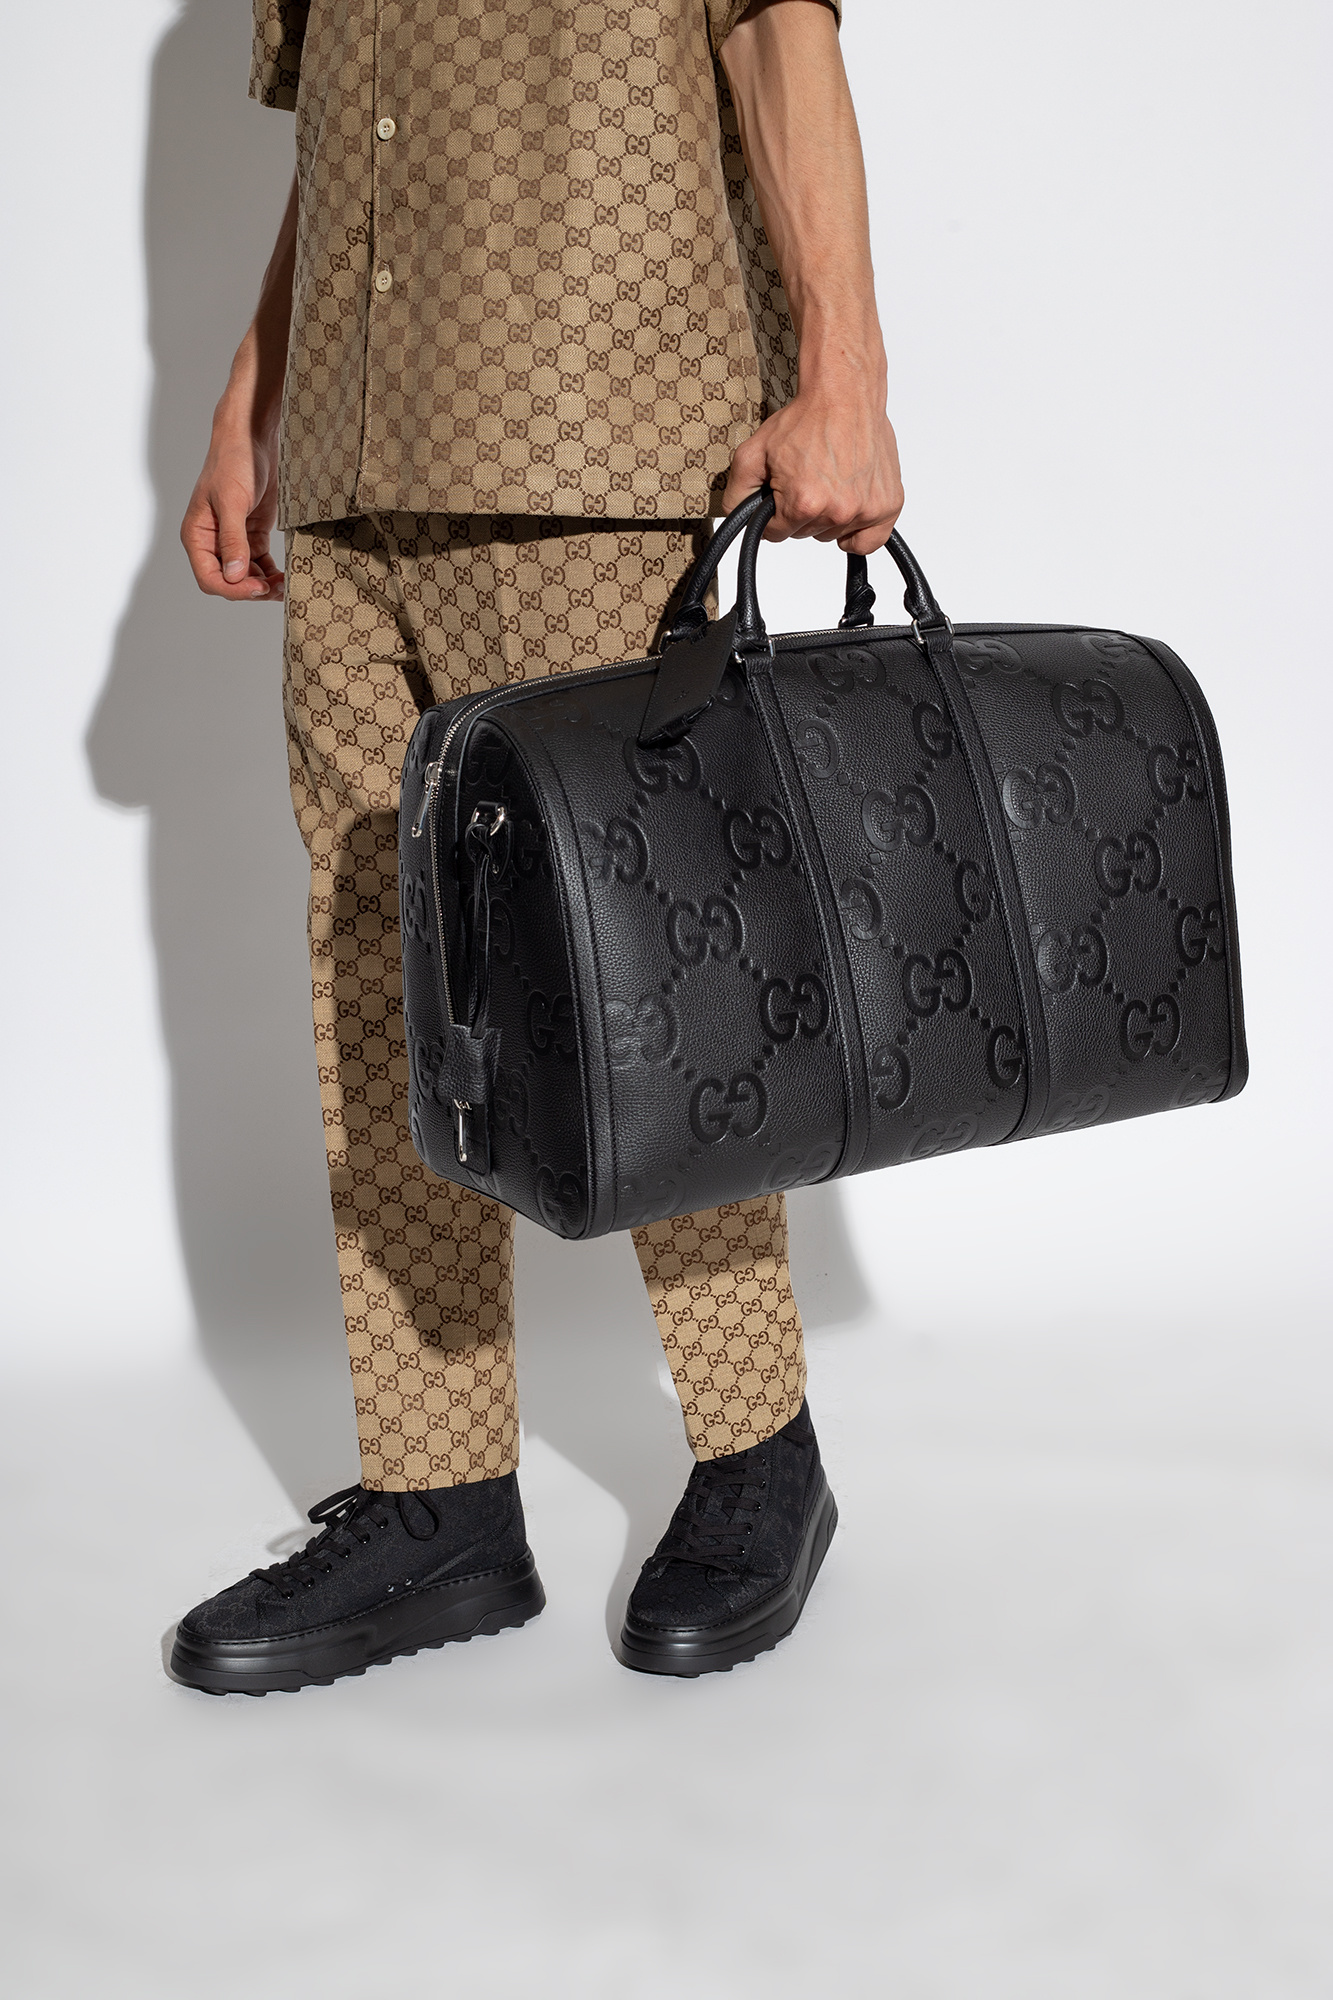 GG Embossed Leather Duffel Bag in Black - Gucci